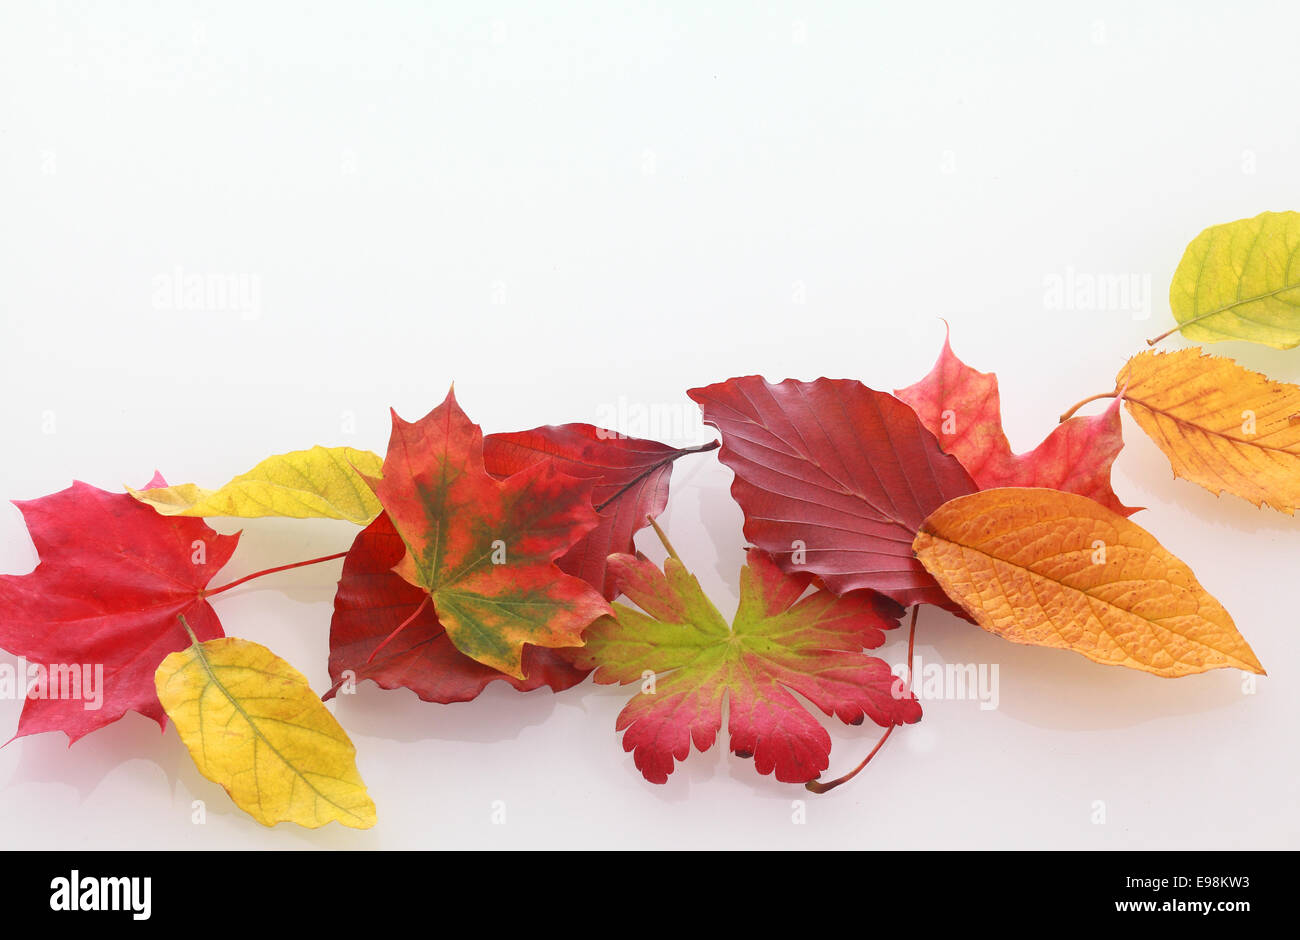 Various Colorful Autumn Leaves from Different Trees in Row on White Background Stock Photo